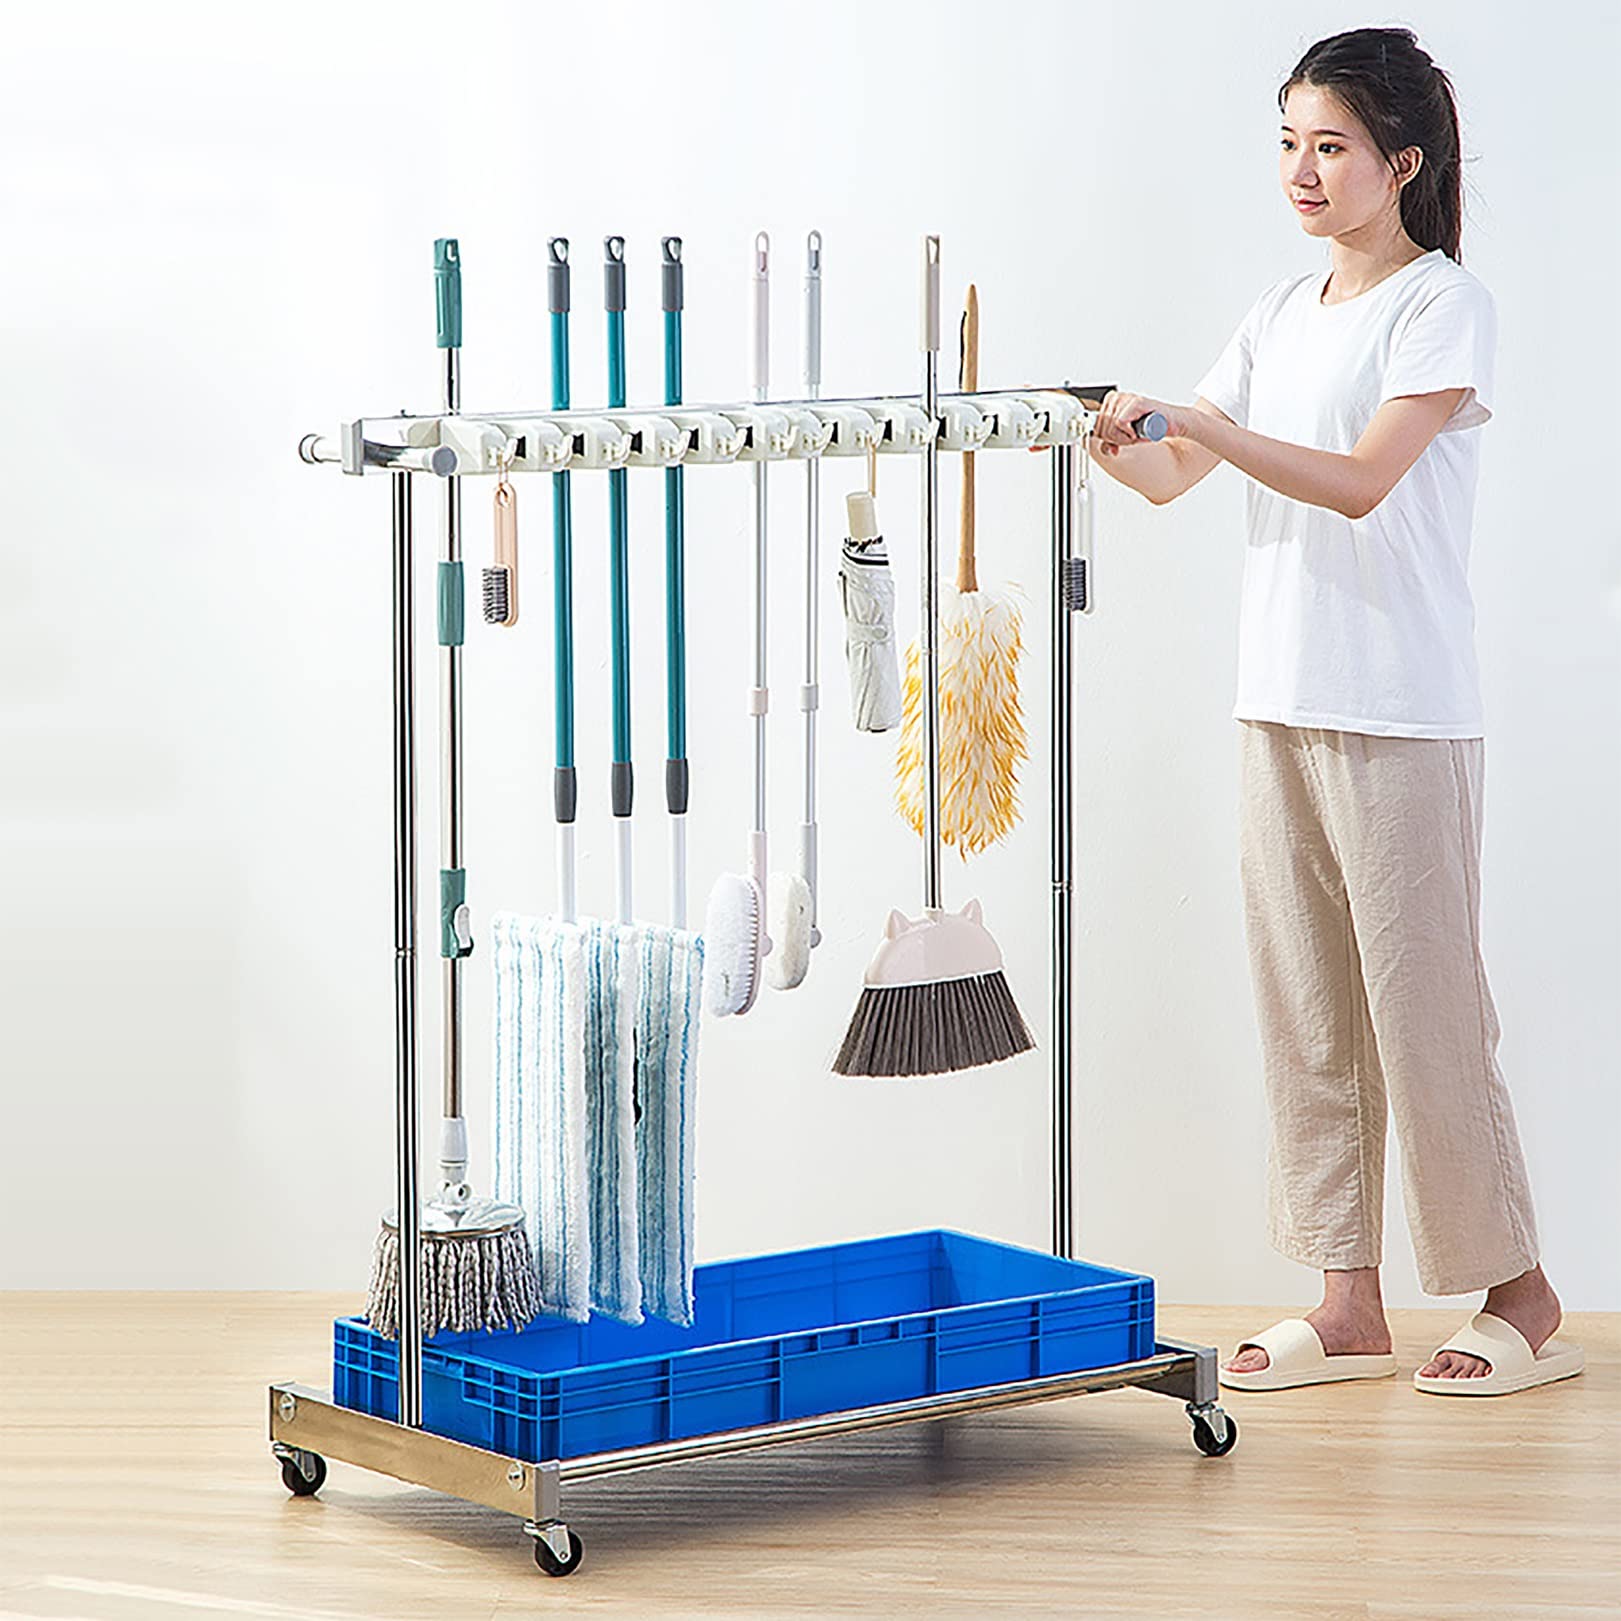 Utility Rack for Mops And Brooms,Cleaning Tool Cart Mop Holder Umbrella Stand,Movable Commercial Mop Rack, Mop Drain Rack,Can put wet mops, with Wheels,for Garden,Garage,Schools,Hospitals,Hotels ( Siz